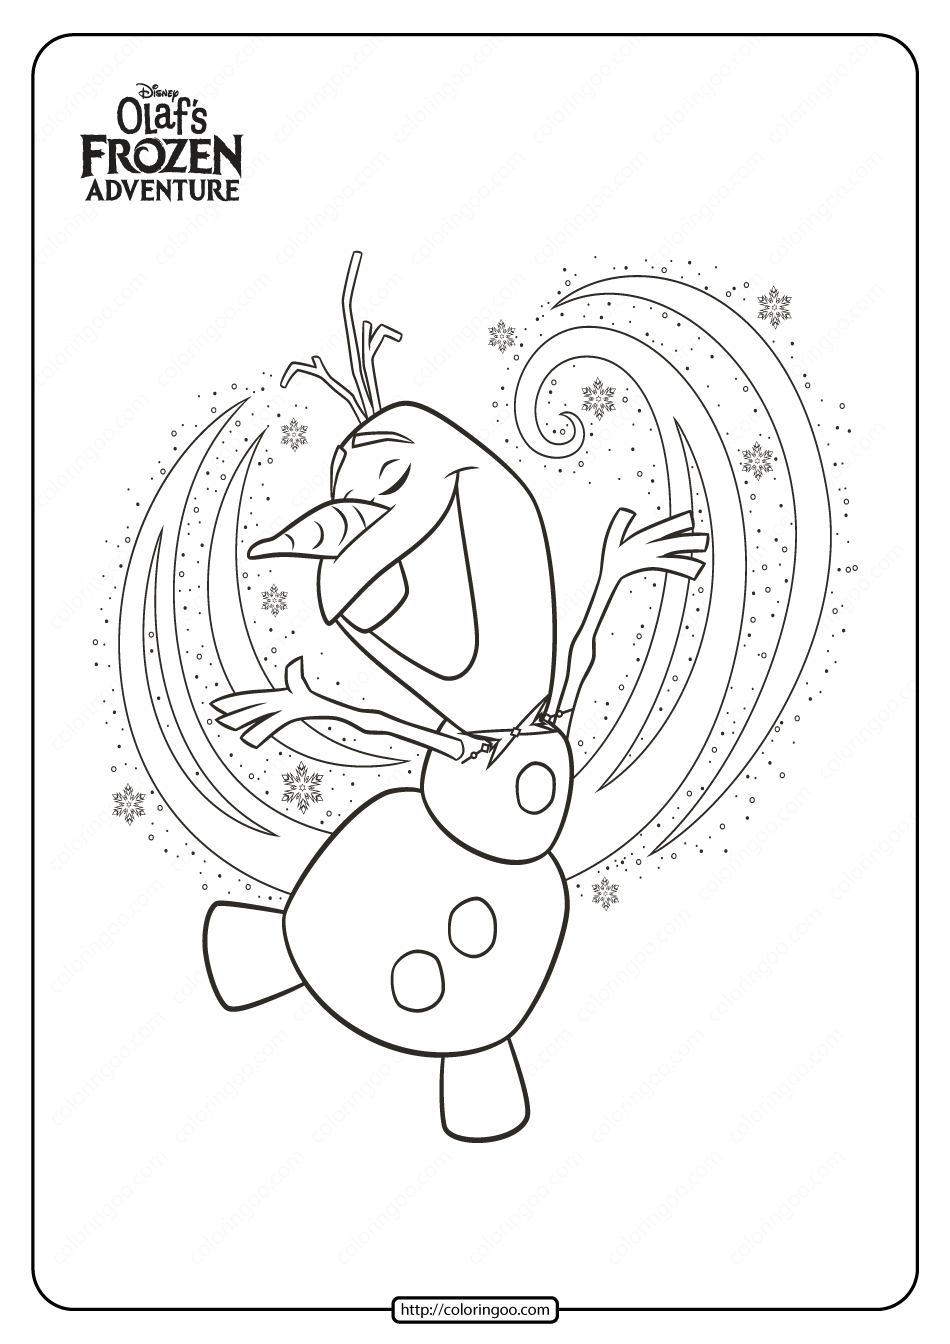 disney olafs frozen adventure coloring pages 02